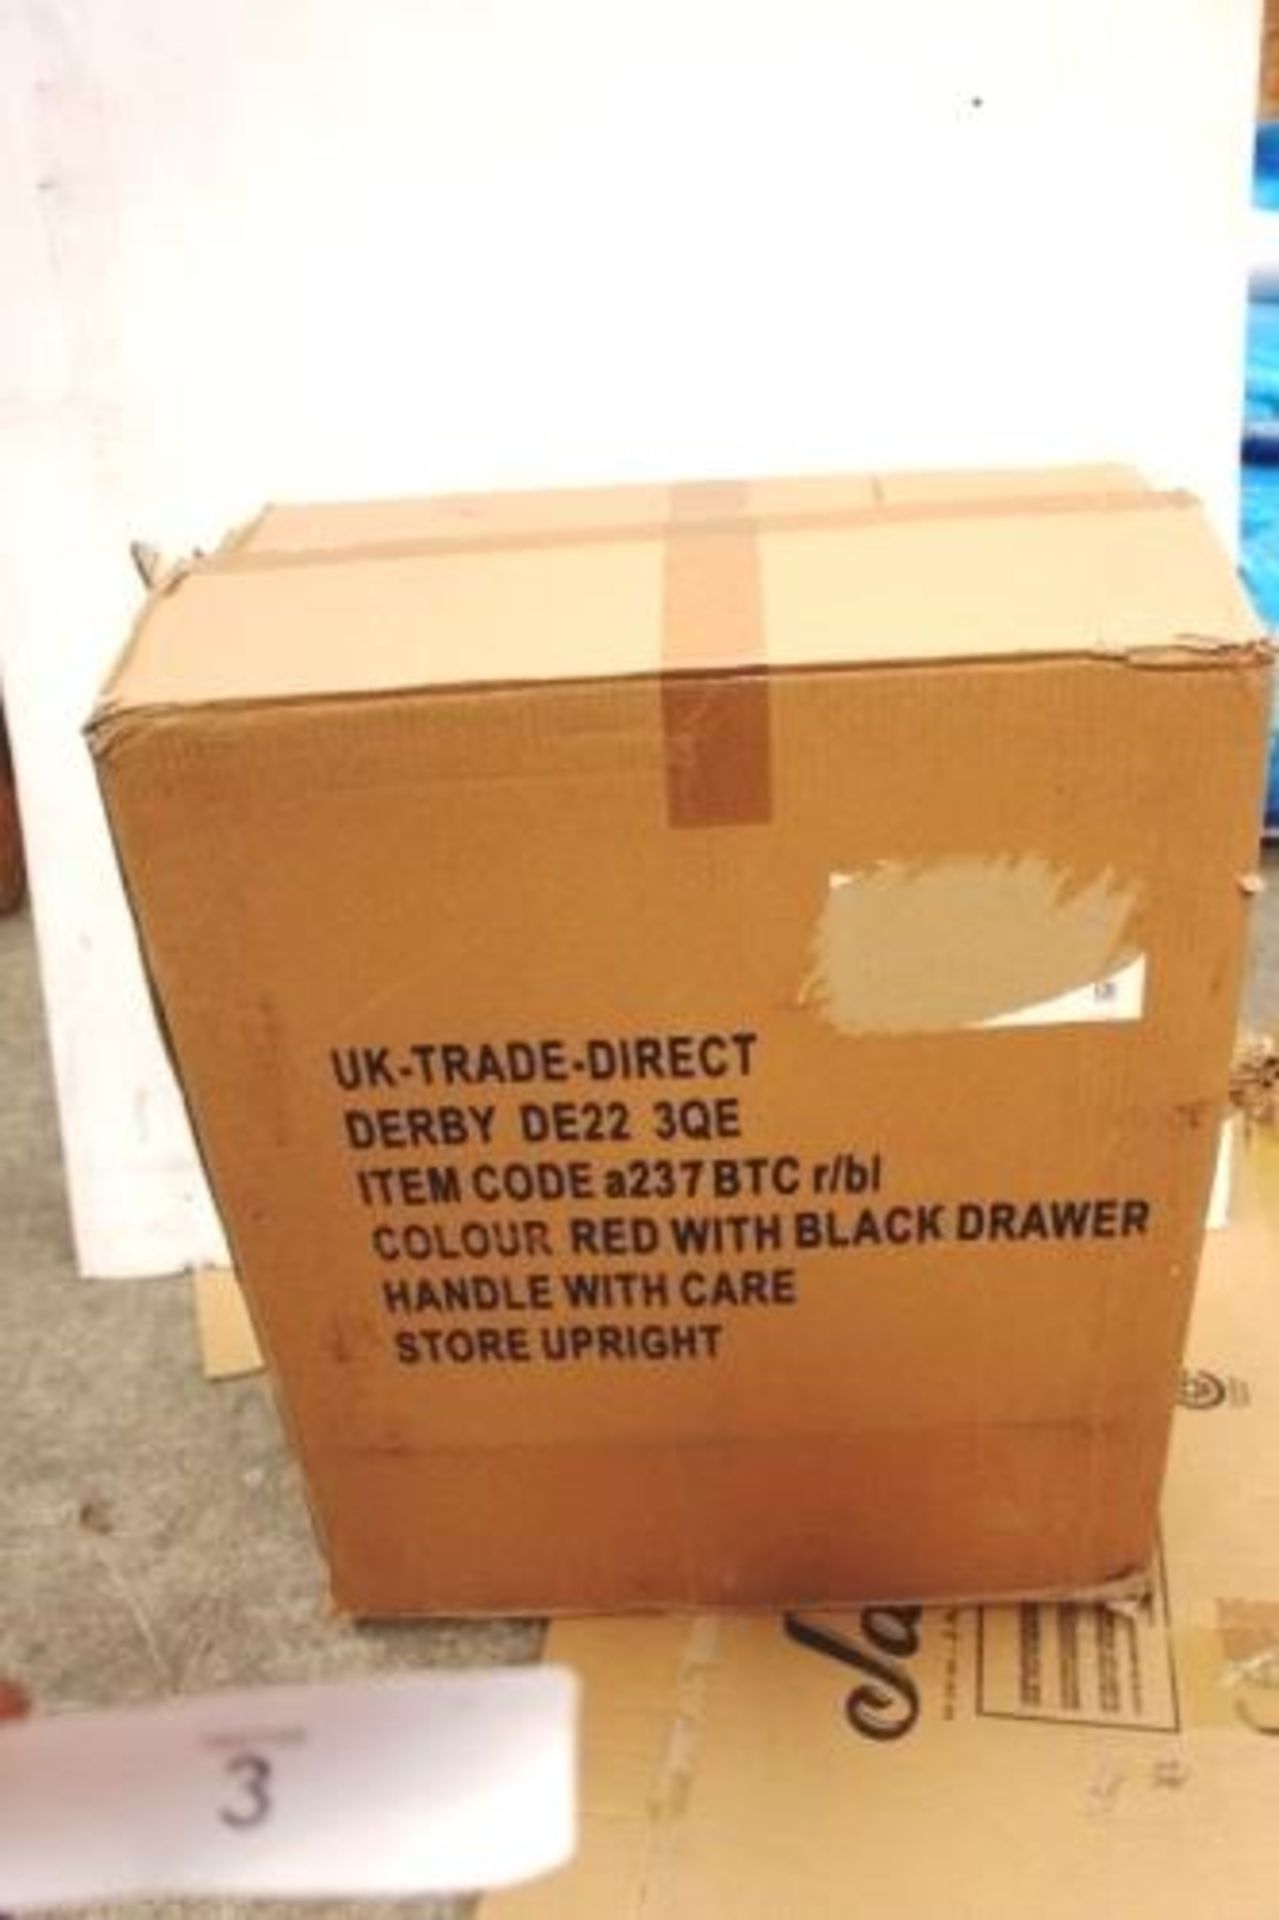 UK Trade Direct red and black tool chest - New in box (TC1) - Image 2 of 2